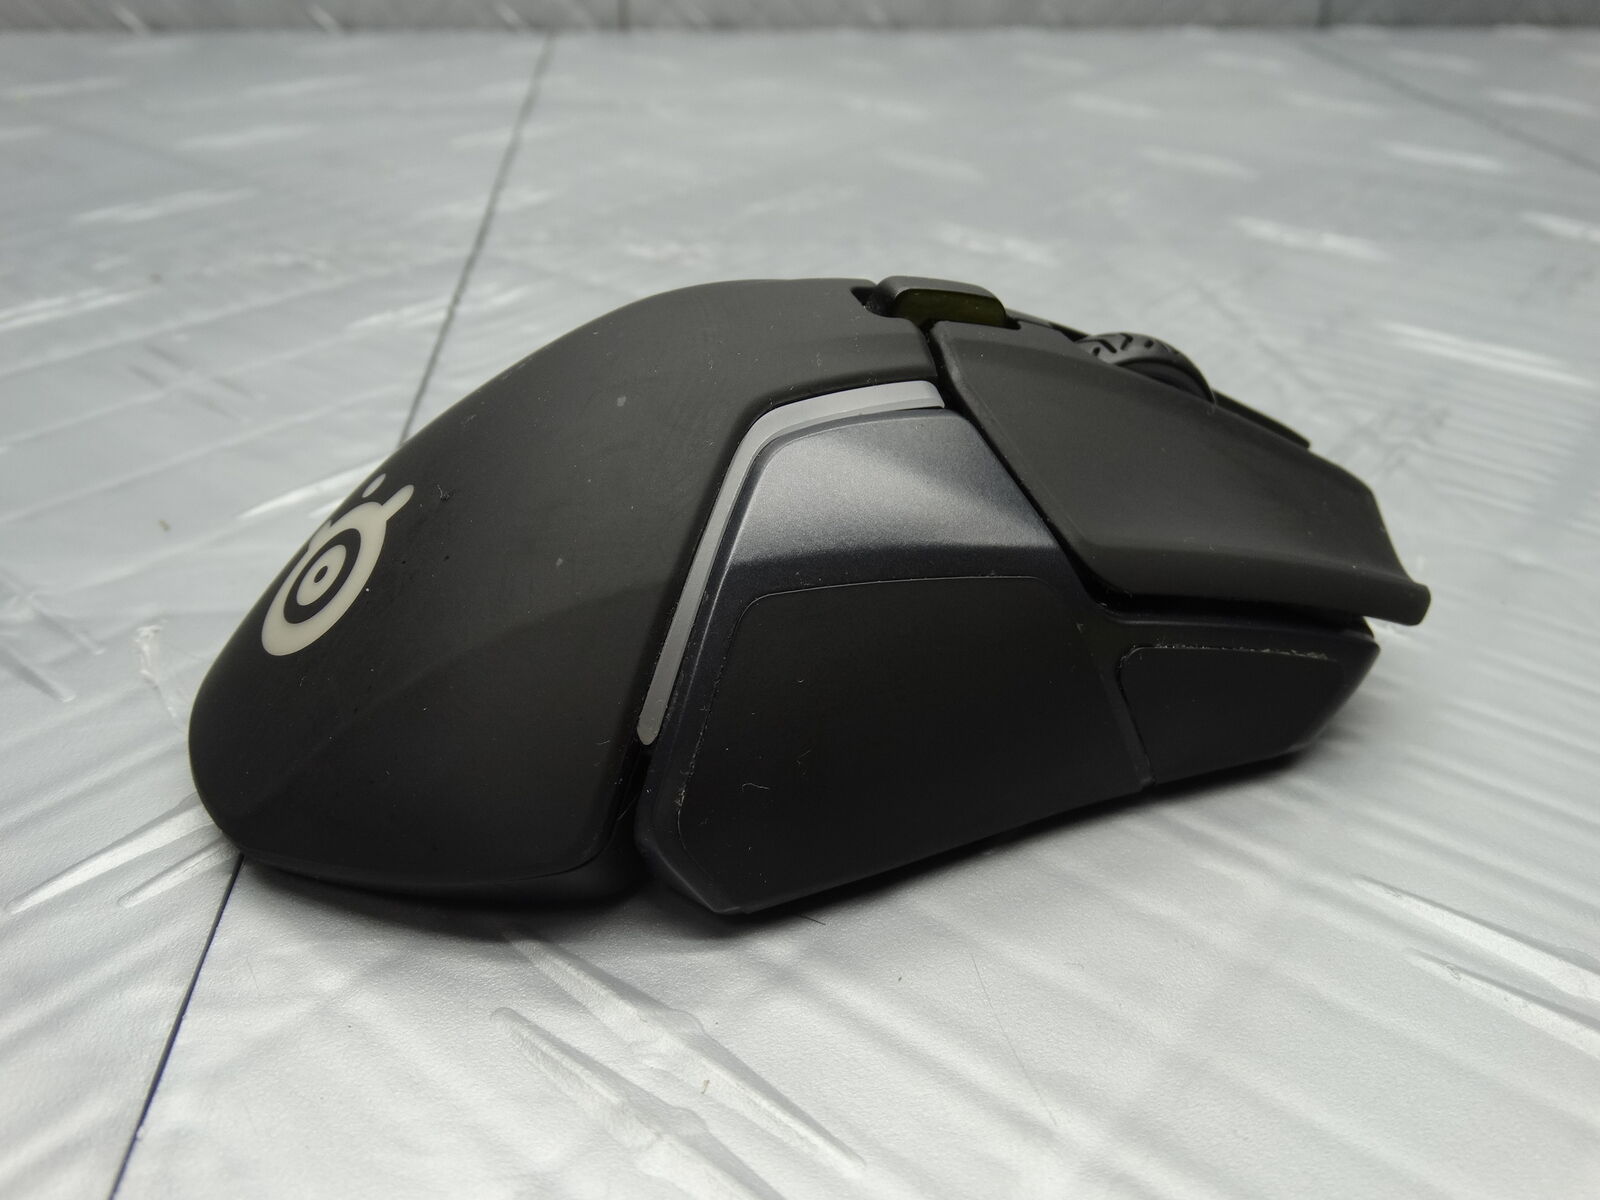 SteelSeries Rival 600 Wireless Gaming Mouse Optical Rechargeable Fair Condition